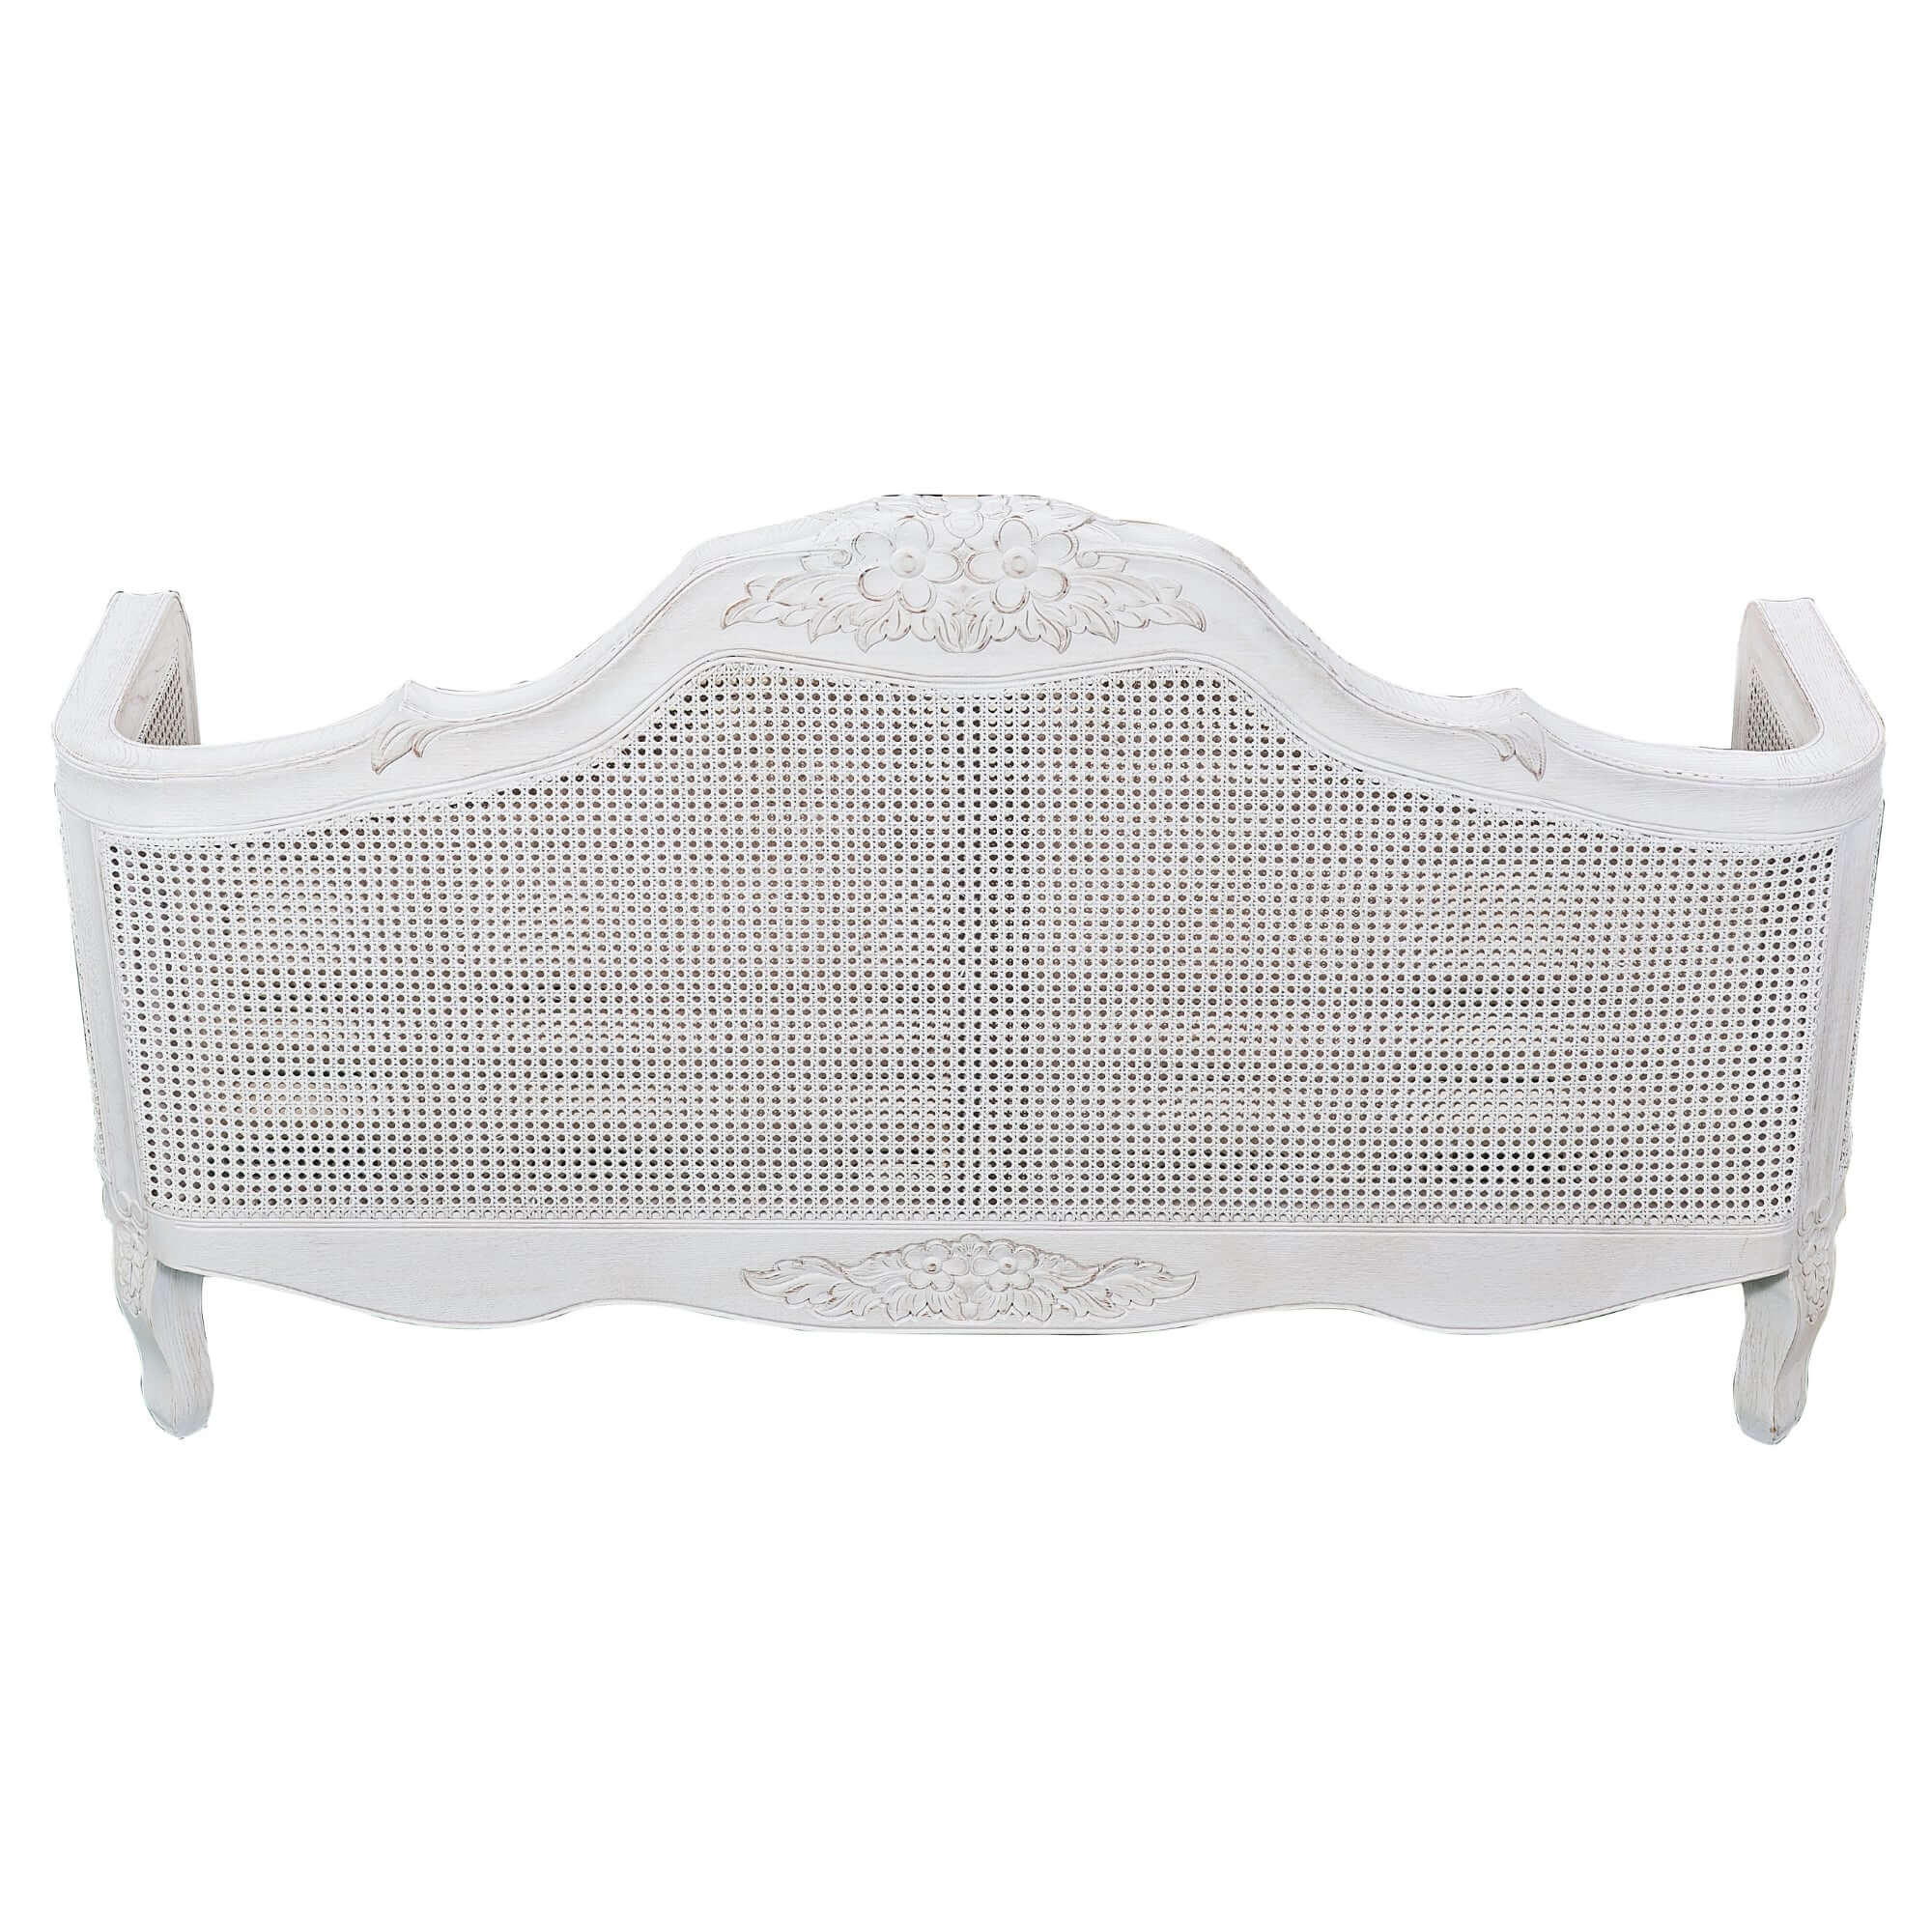 Alice Queen Size Bed Frame Rattan Timber Wood Mattress Base Distressed White-Upinteriors